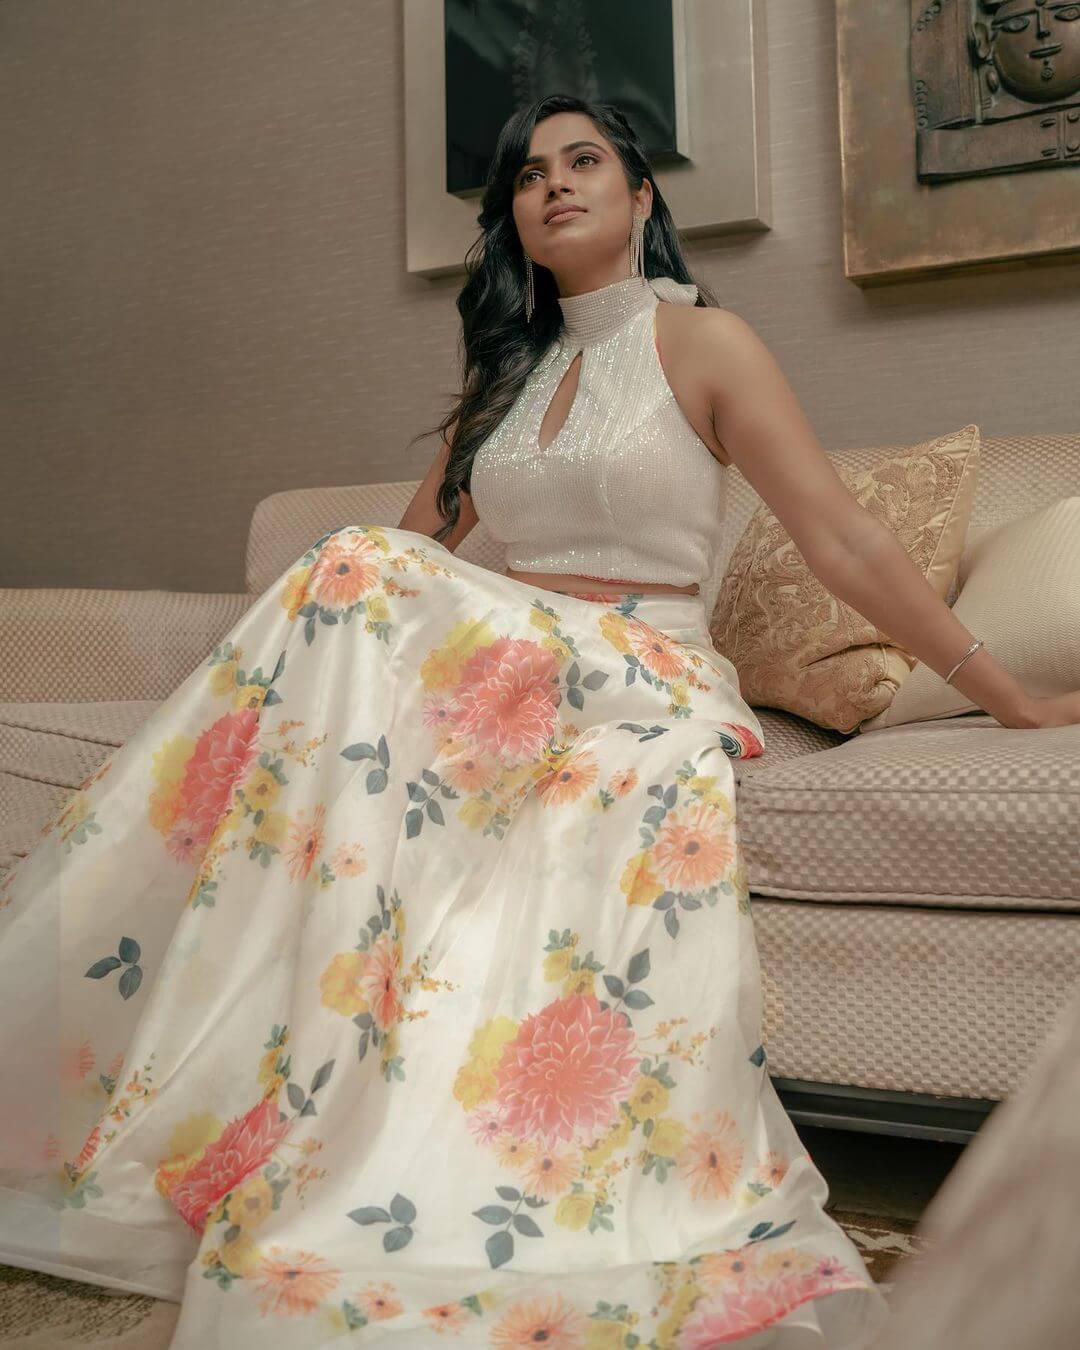 Ramya Pandian  Flattering Look In Floral Print Skirt With White High Neck Top